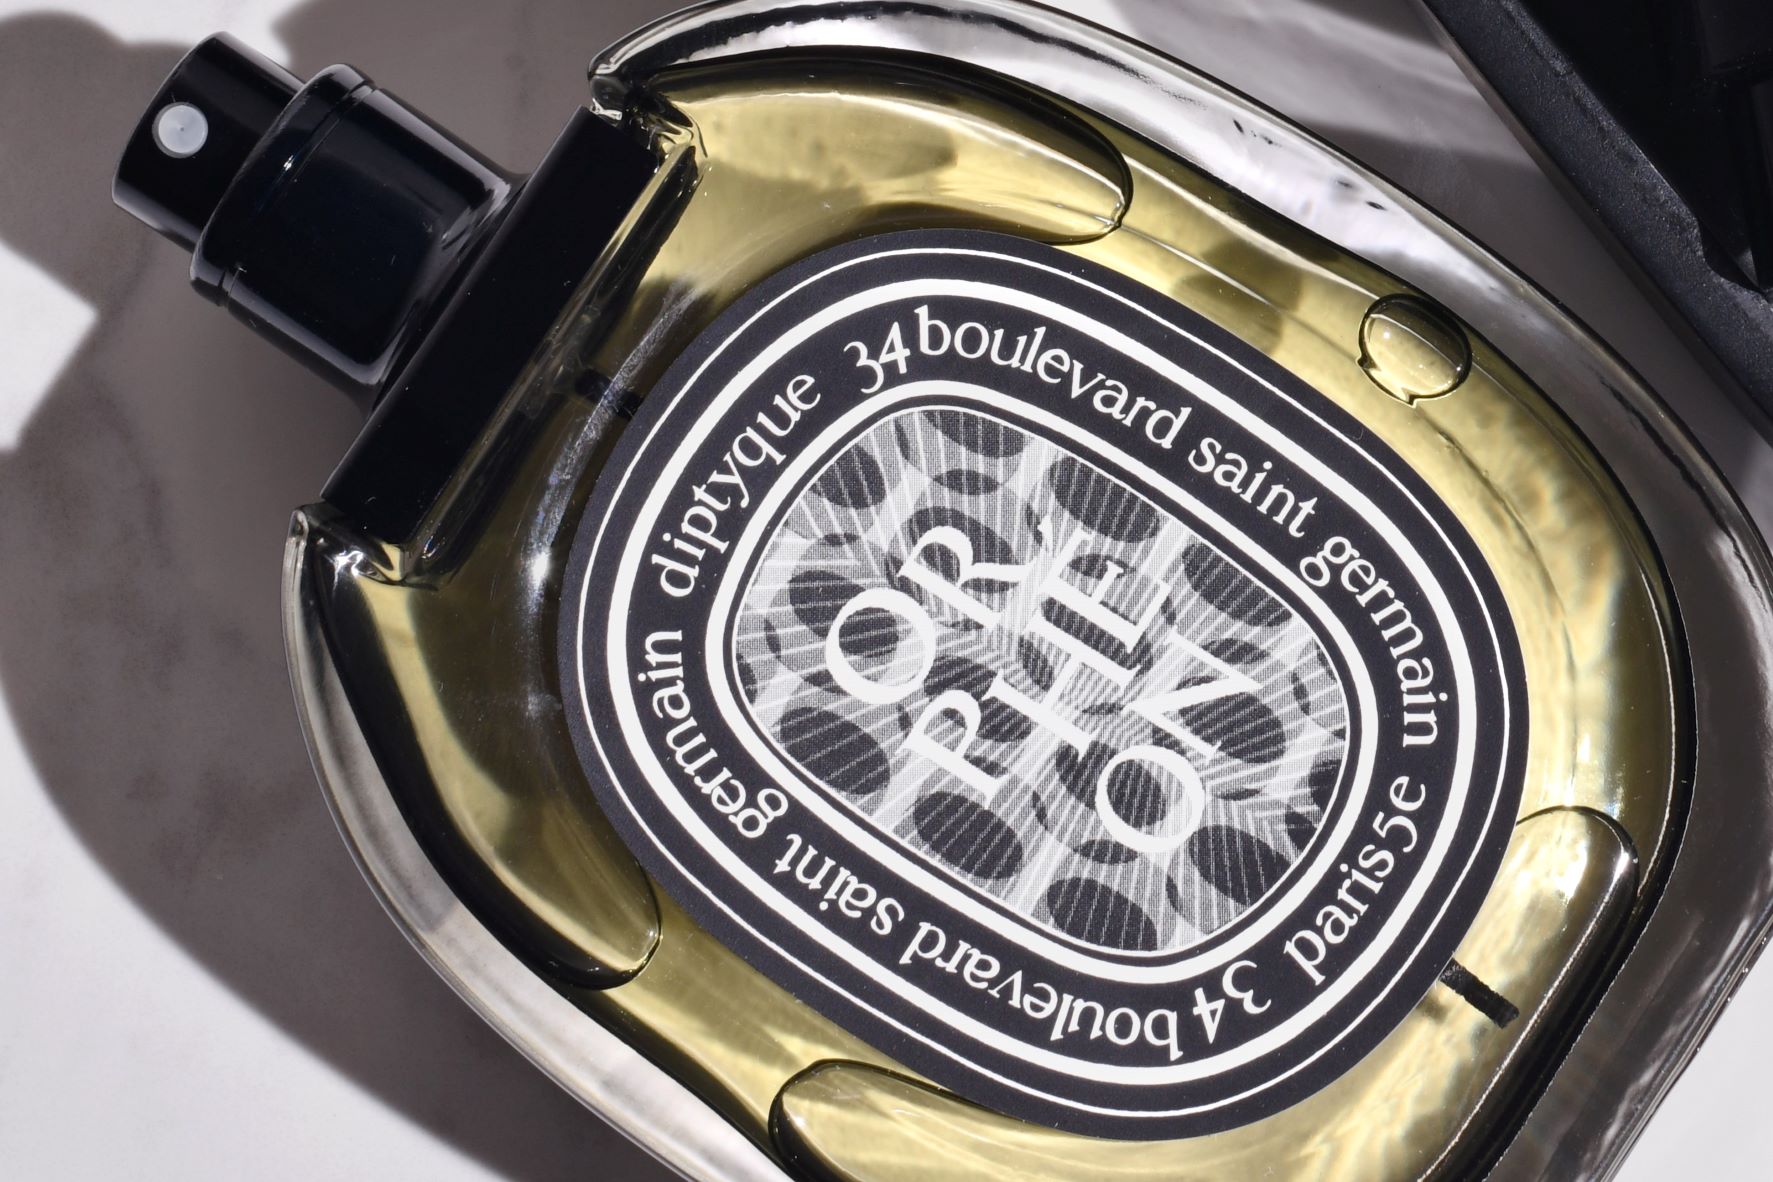 Our Top Five Diptyque Fragrance Buys